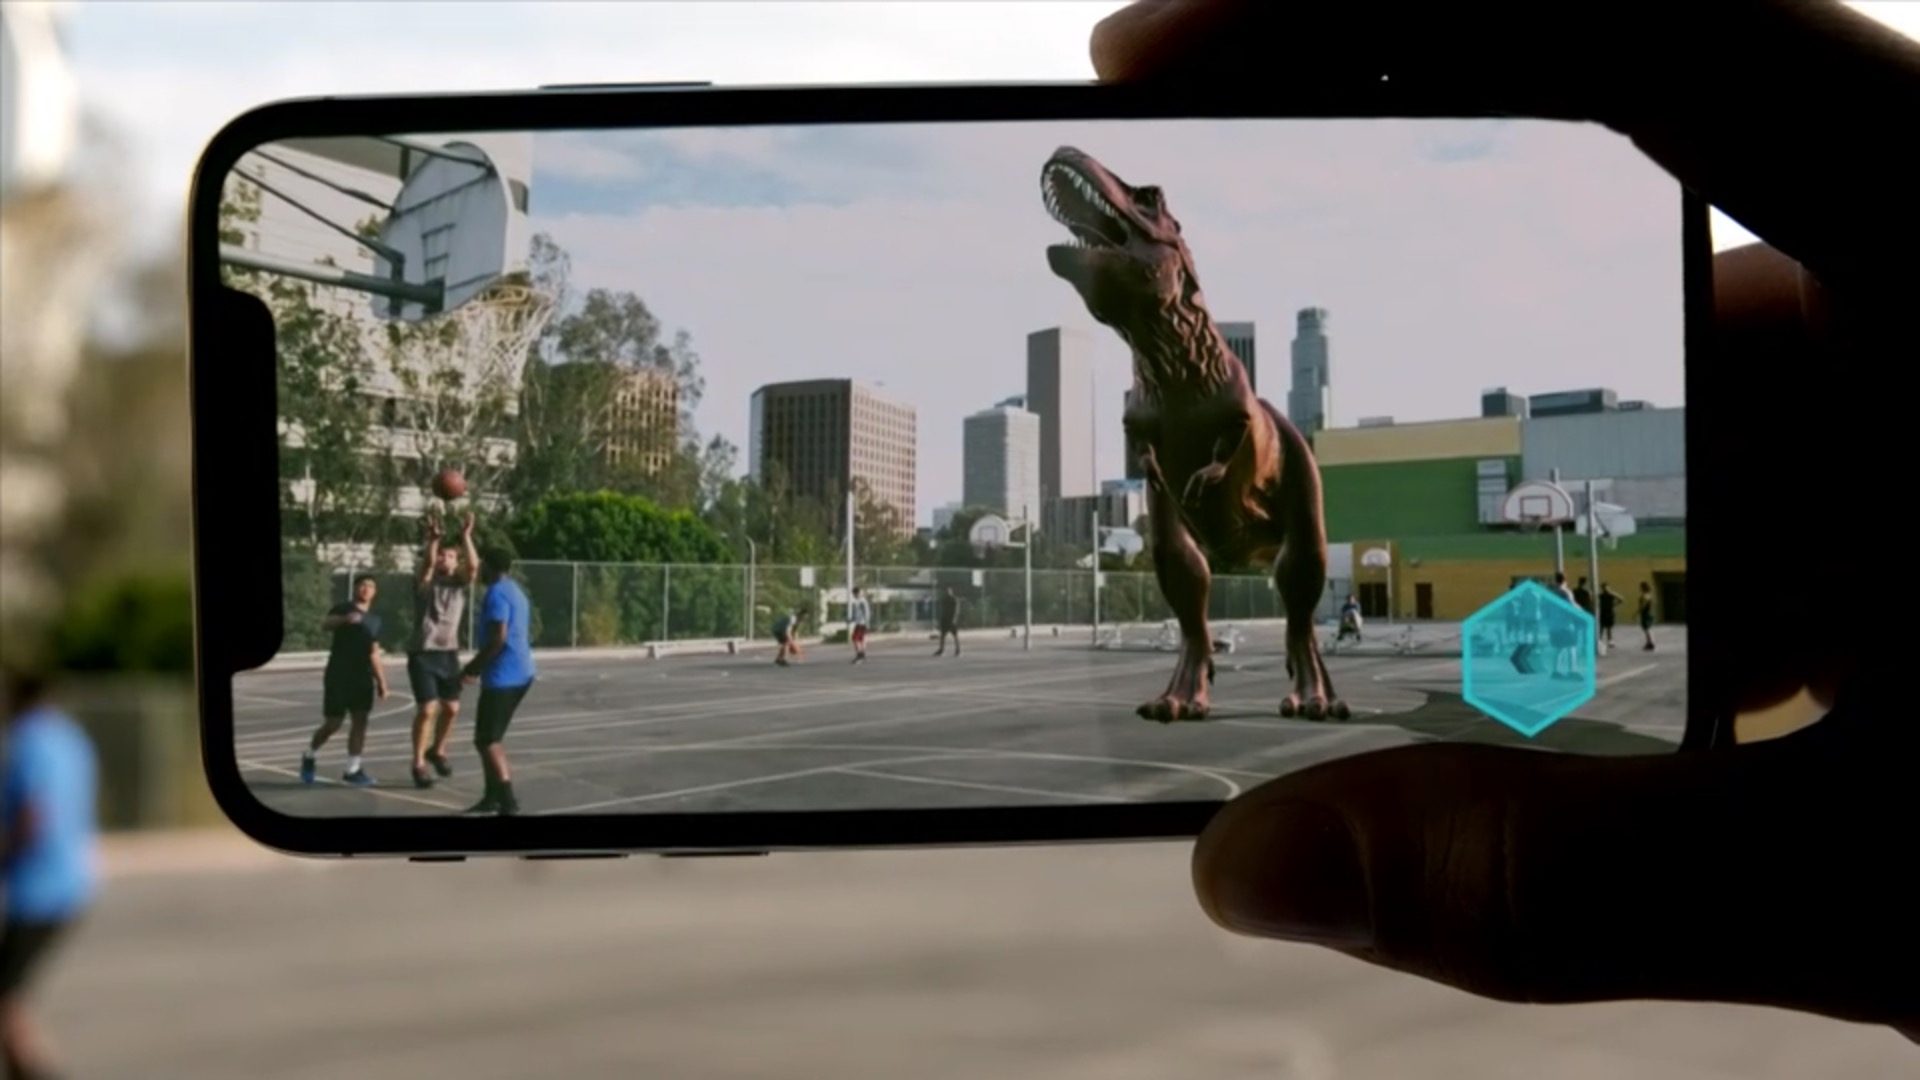 iOS 12 will upgrade ARKit with ability for two iPhones to see same virtual object